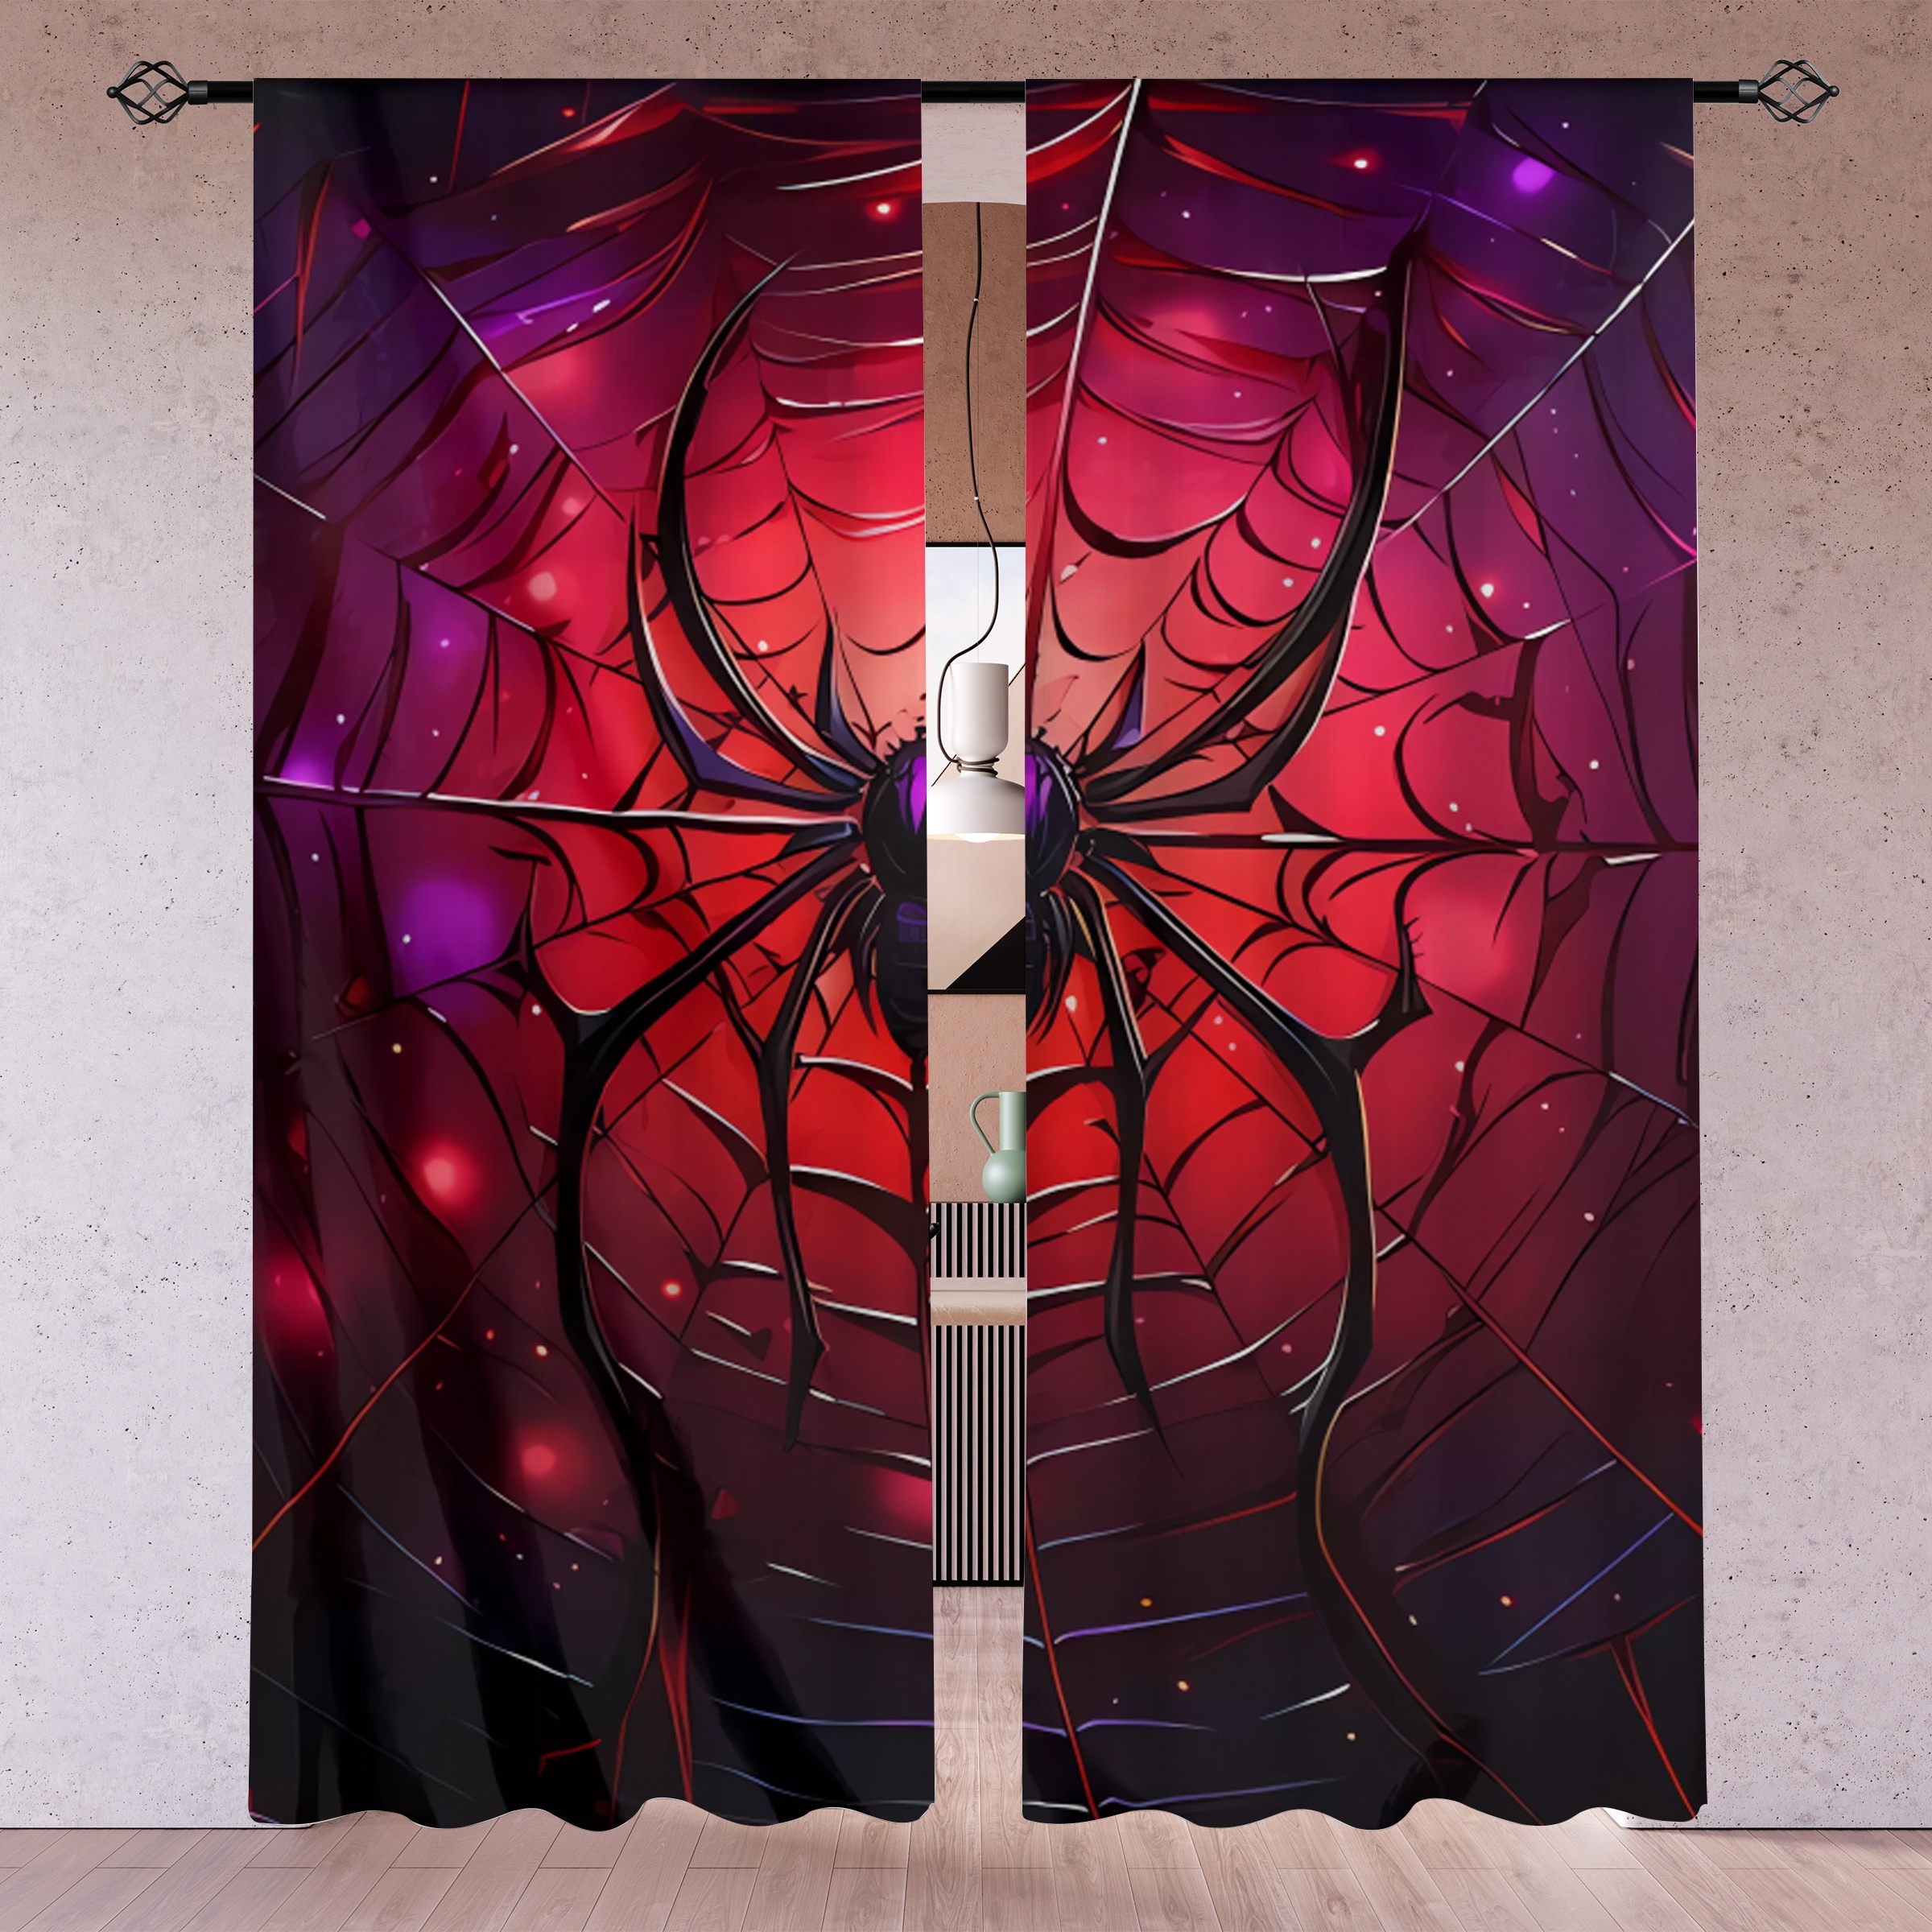 

2pcs, Red Bottom Spider Printed Translucent Curtains, Multi-scene Polyester Rod Pocket Decorative Curtains For Living Room Playroom Bedroom Home Decor Party Supplies